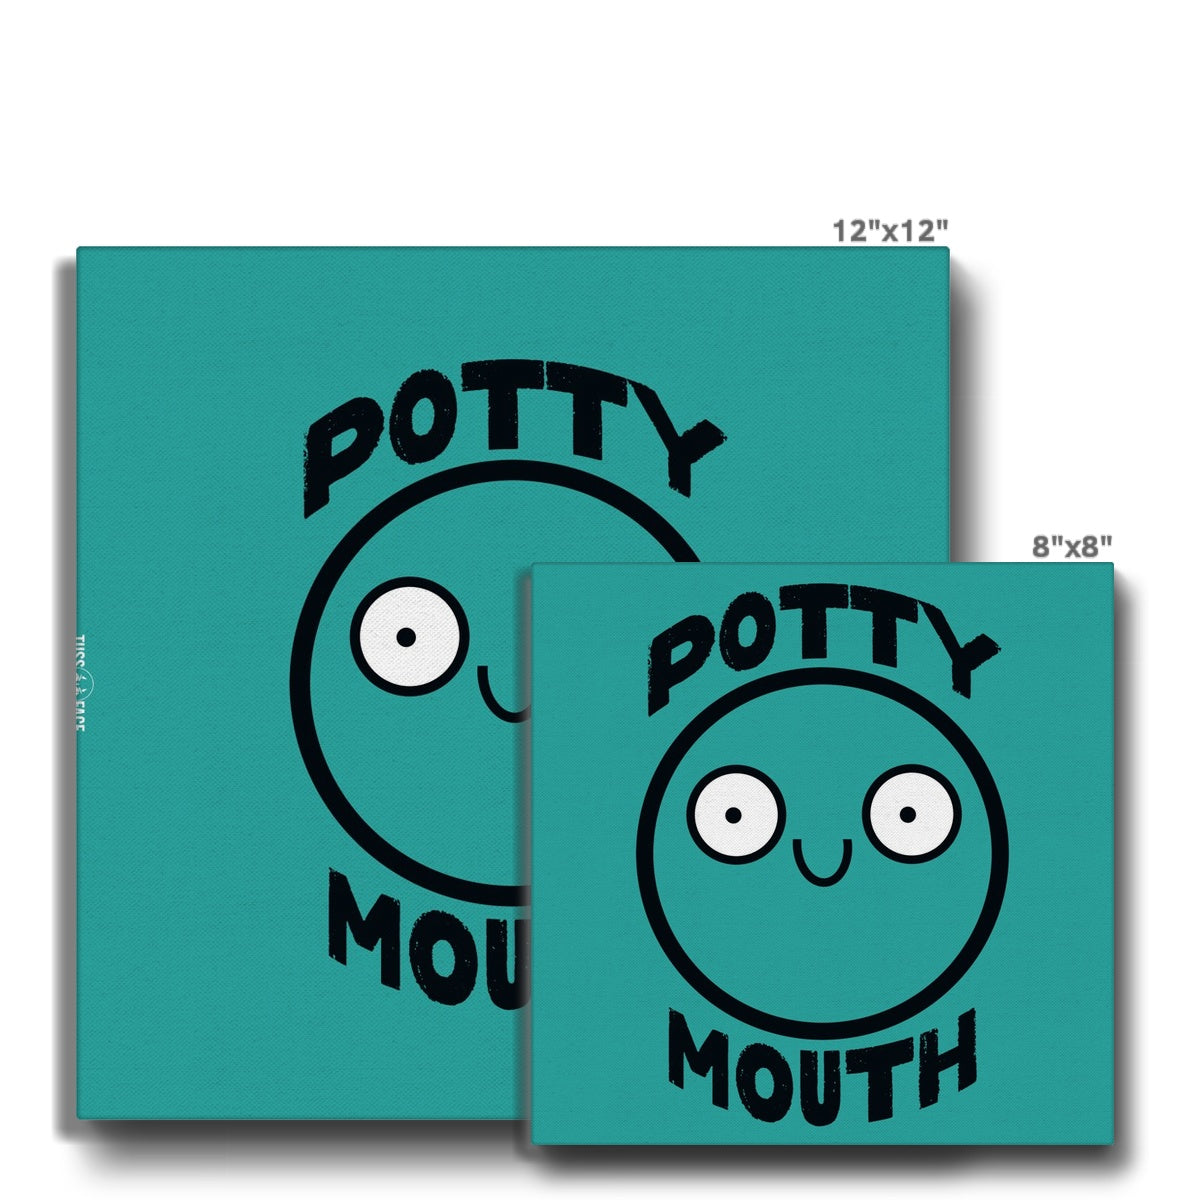 Potty Mouth (Teal) - Eco Canvas